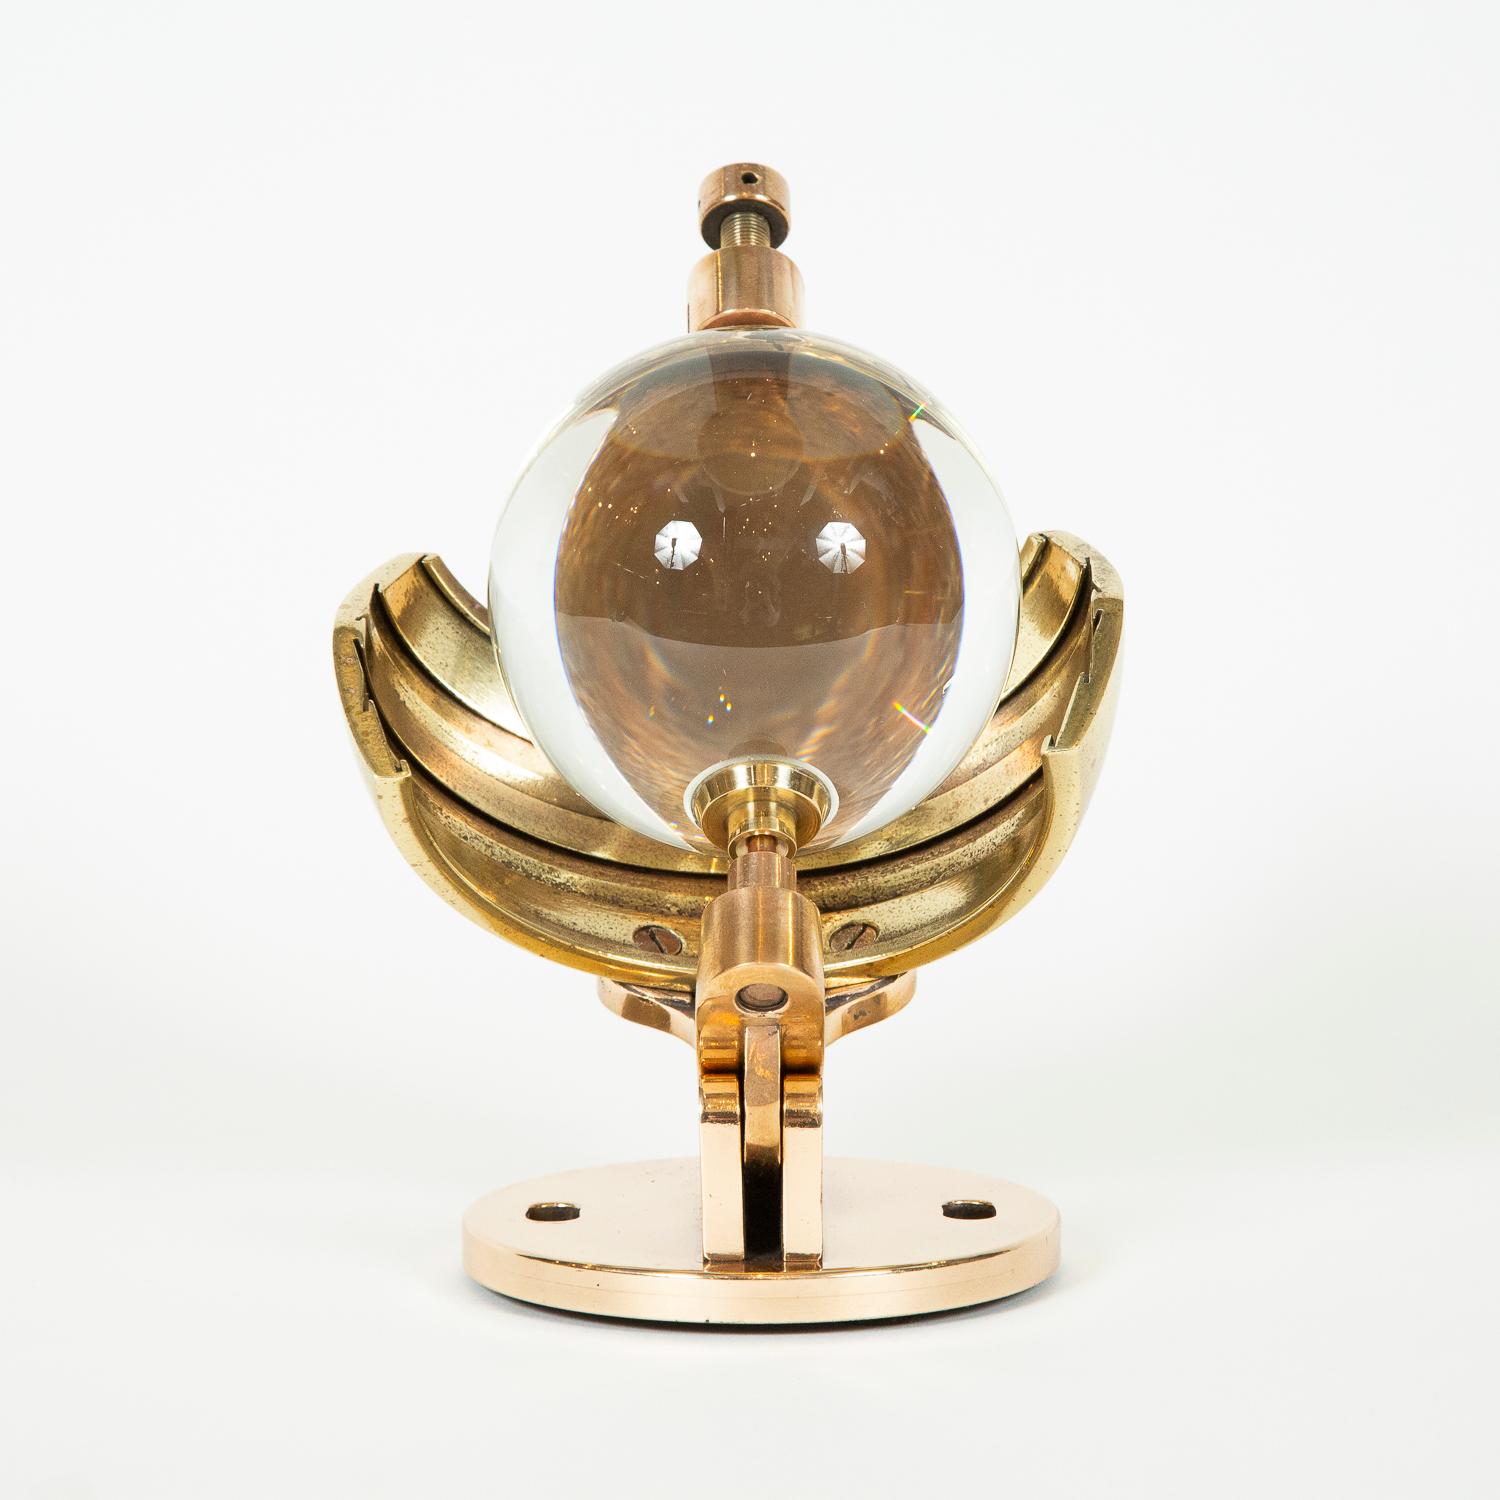 A Campbell–Stokes sunshine recorder by Casella of London. 

The Campbell–Stokes recorder (sometimes called a Stokes sphere) is a kind of sunshine recorder. It was invented by John Francis Campbell in 1853 and modified in 1879 by Sir George Gabriel